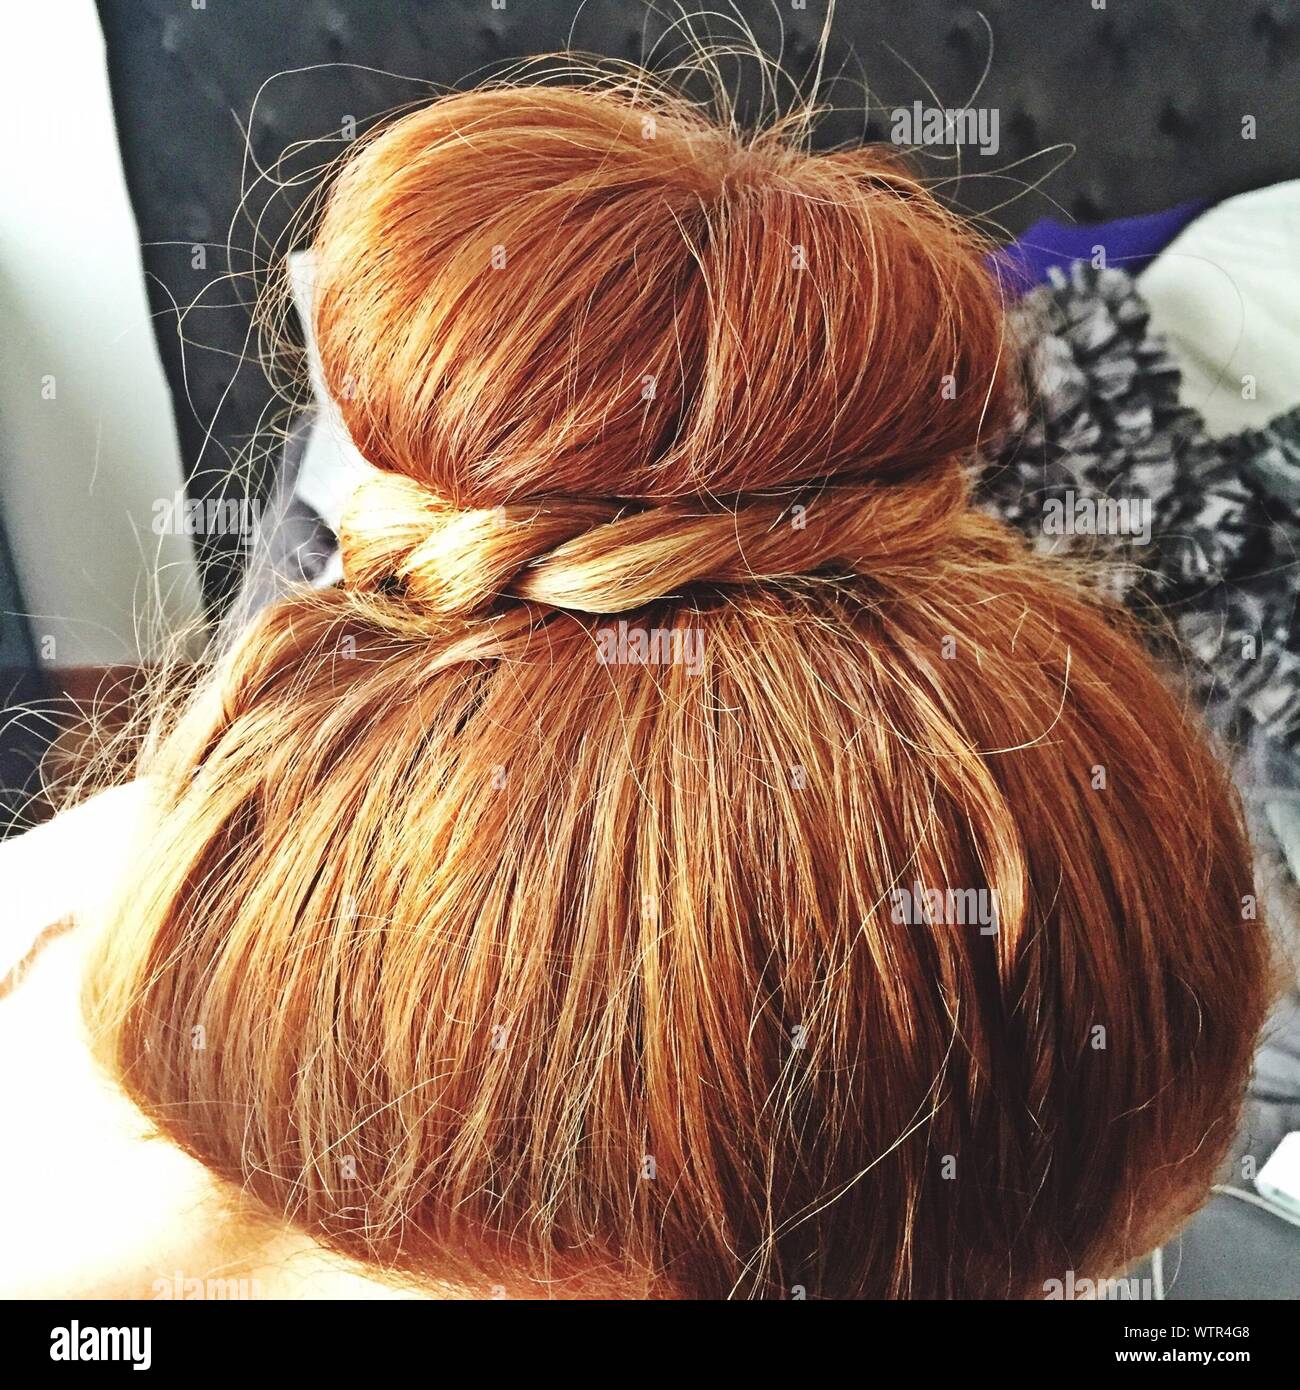 Cropped Image Of Blond Haired Bun Stock Photo